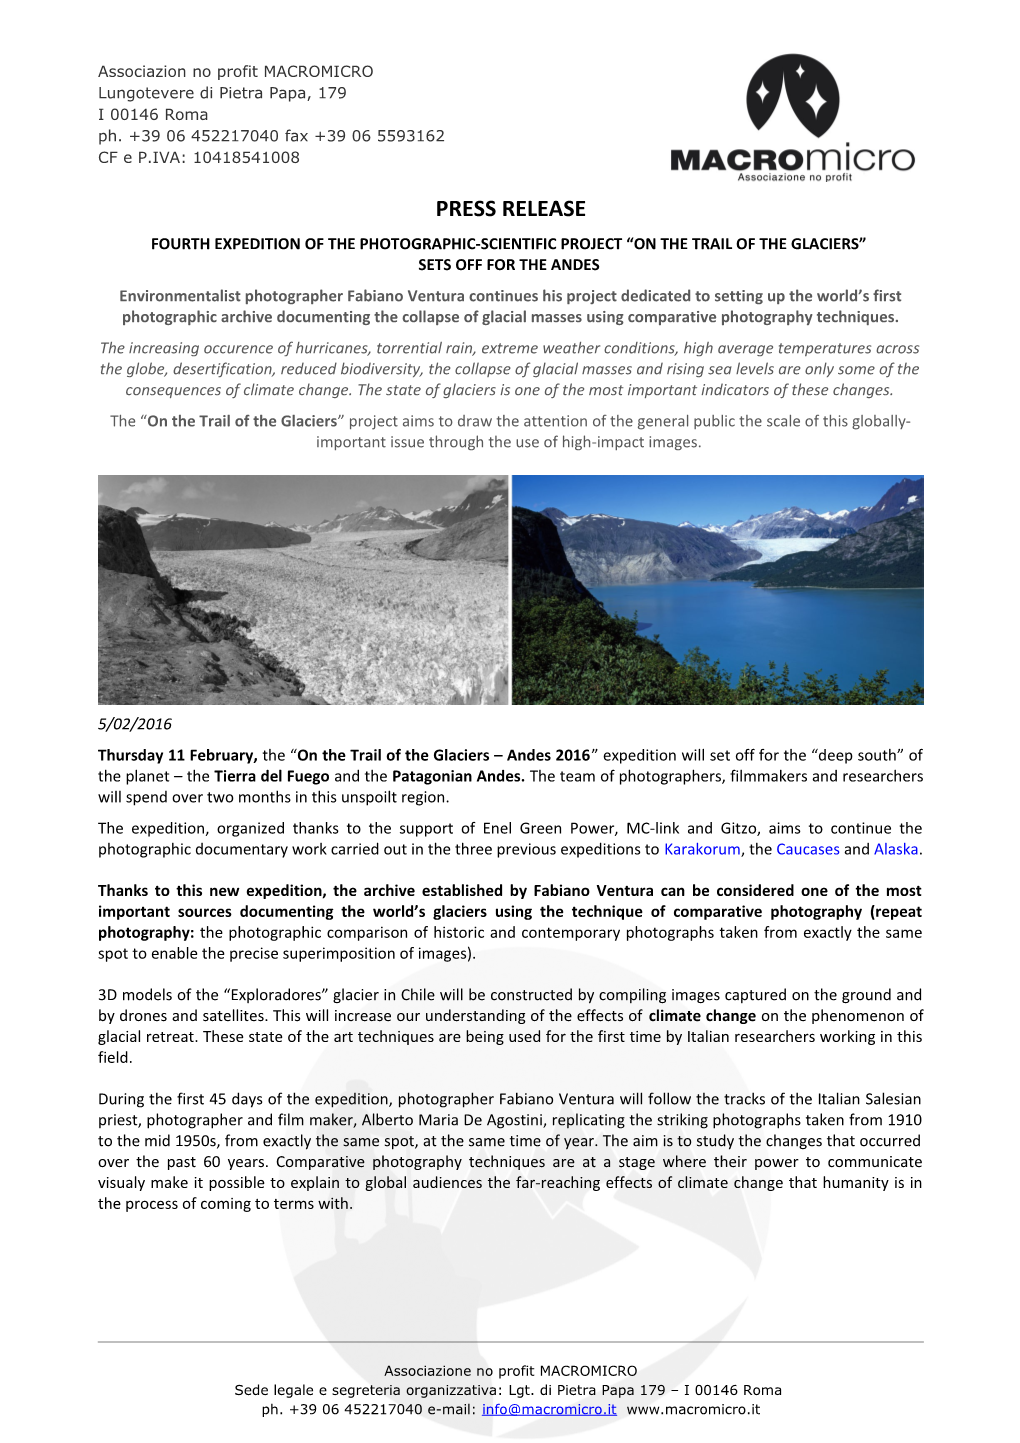 Fourth Expedition of the Photographic-Scientific Project on the Trail of the Glaciers